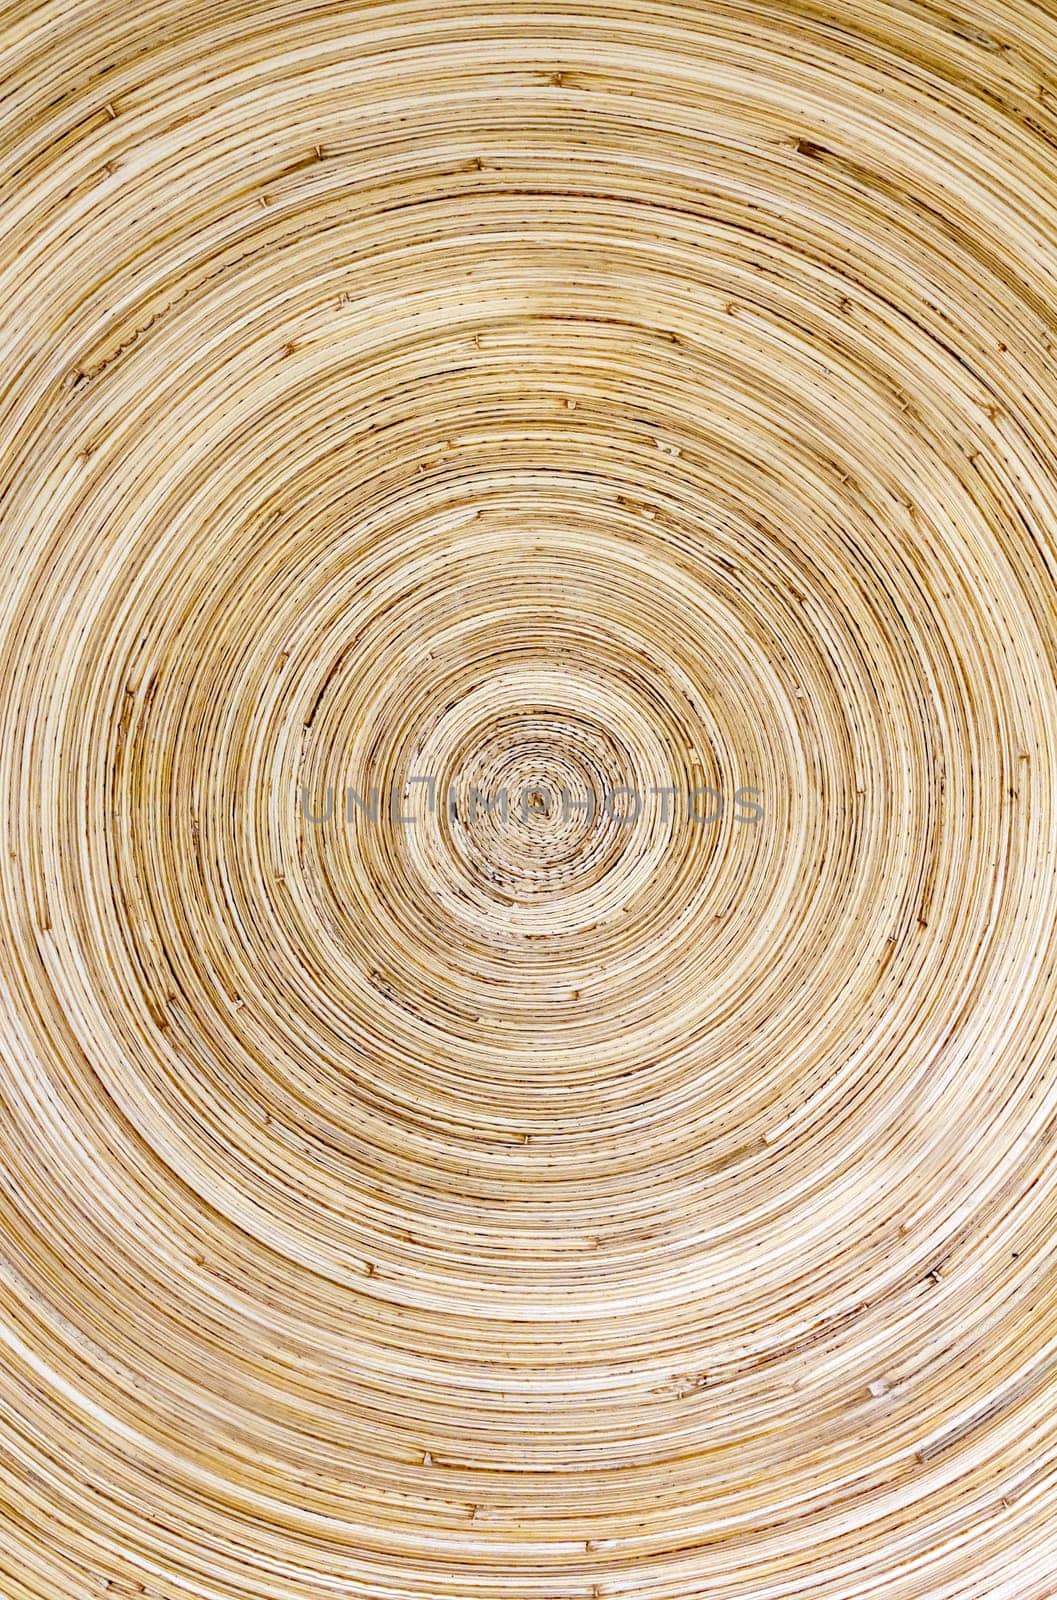 Top view closeup of brown slice of freshly cut wood texture with dense concentric growth rings.